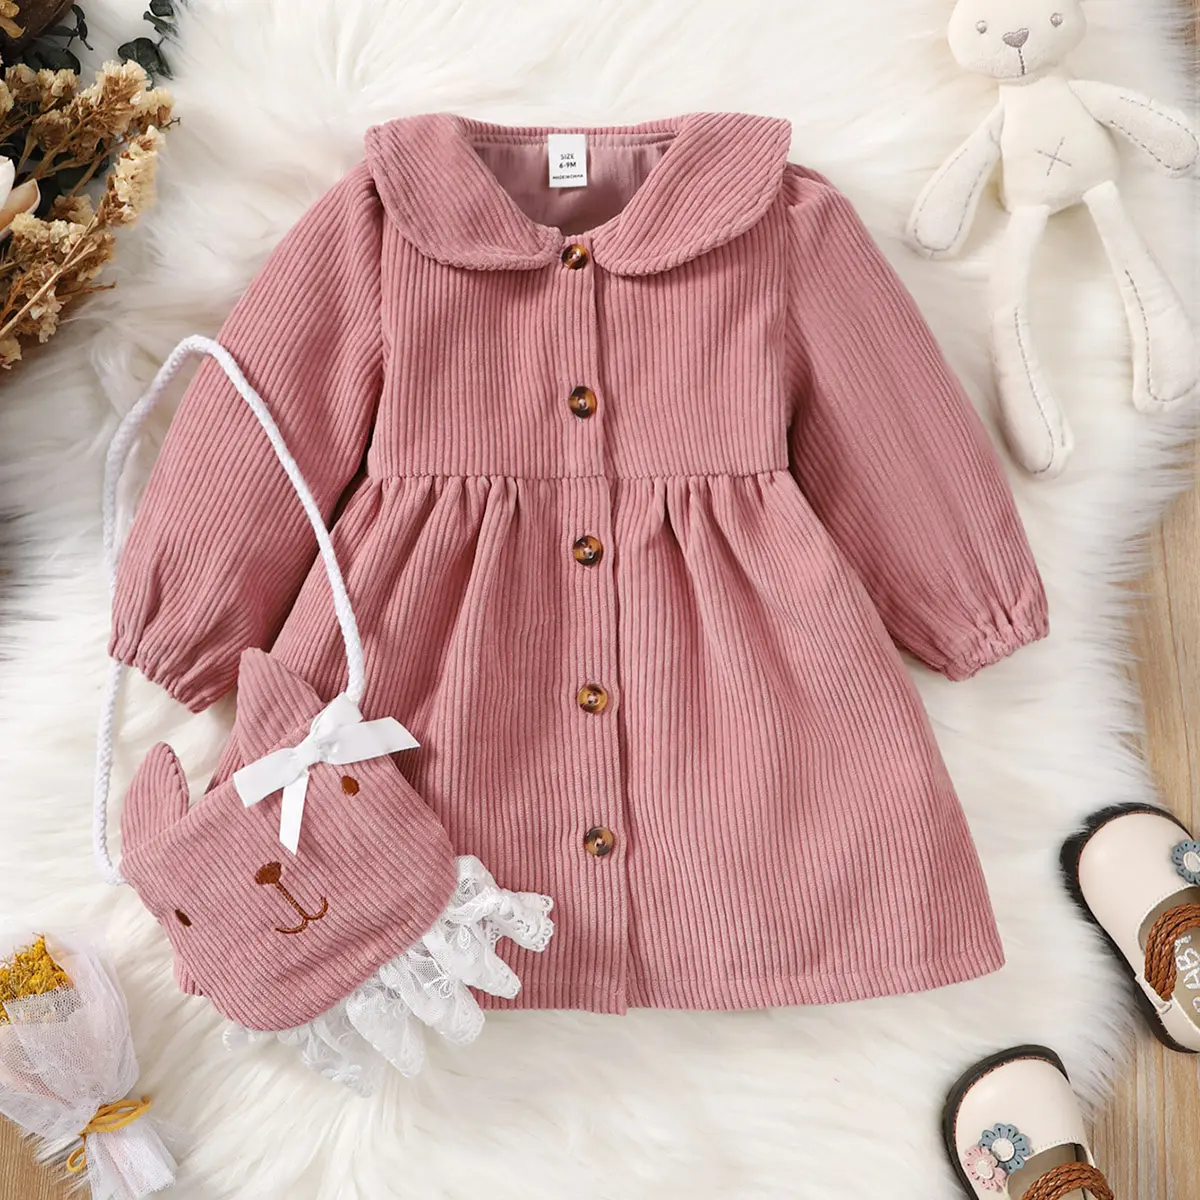 Girl Dress Baby Girl Summer Round Neck Pink Long Sleeve Dress With Backpack Kids Dresses For Girls Casual